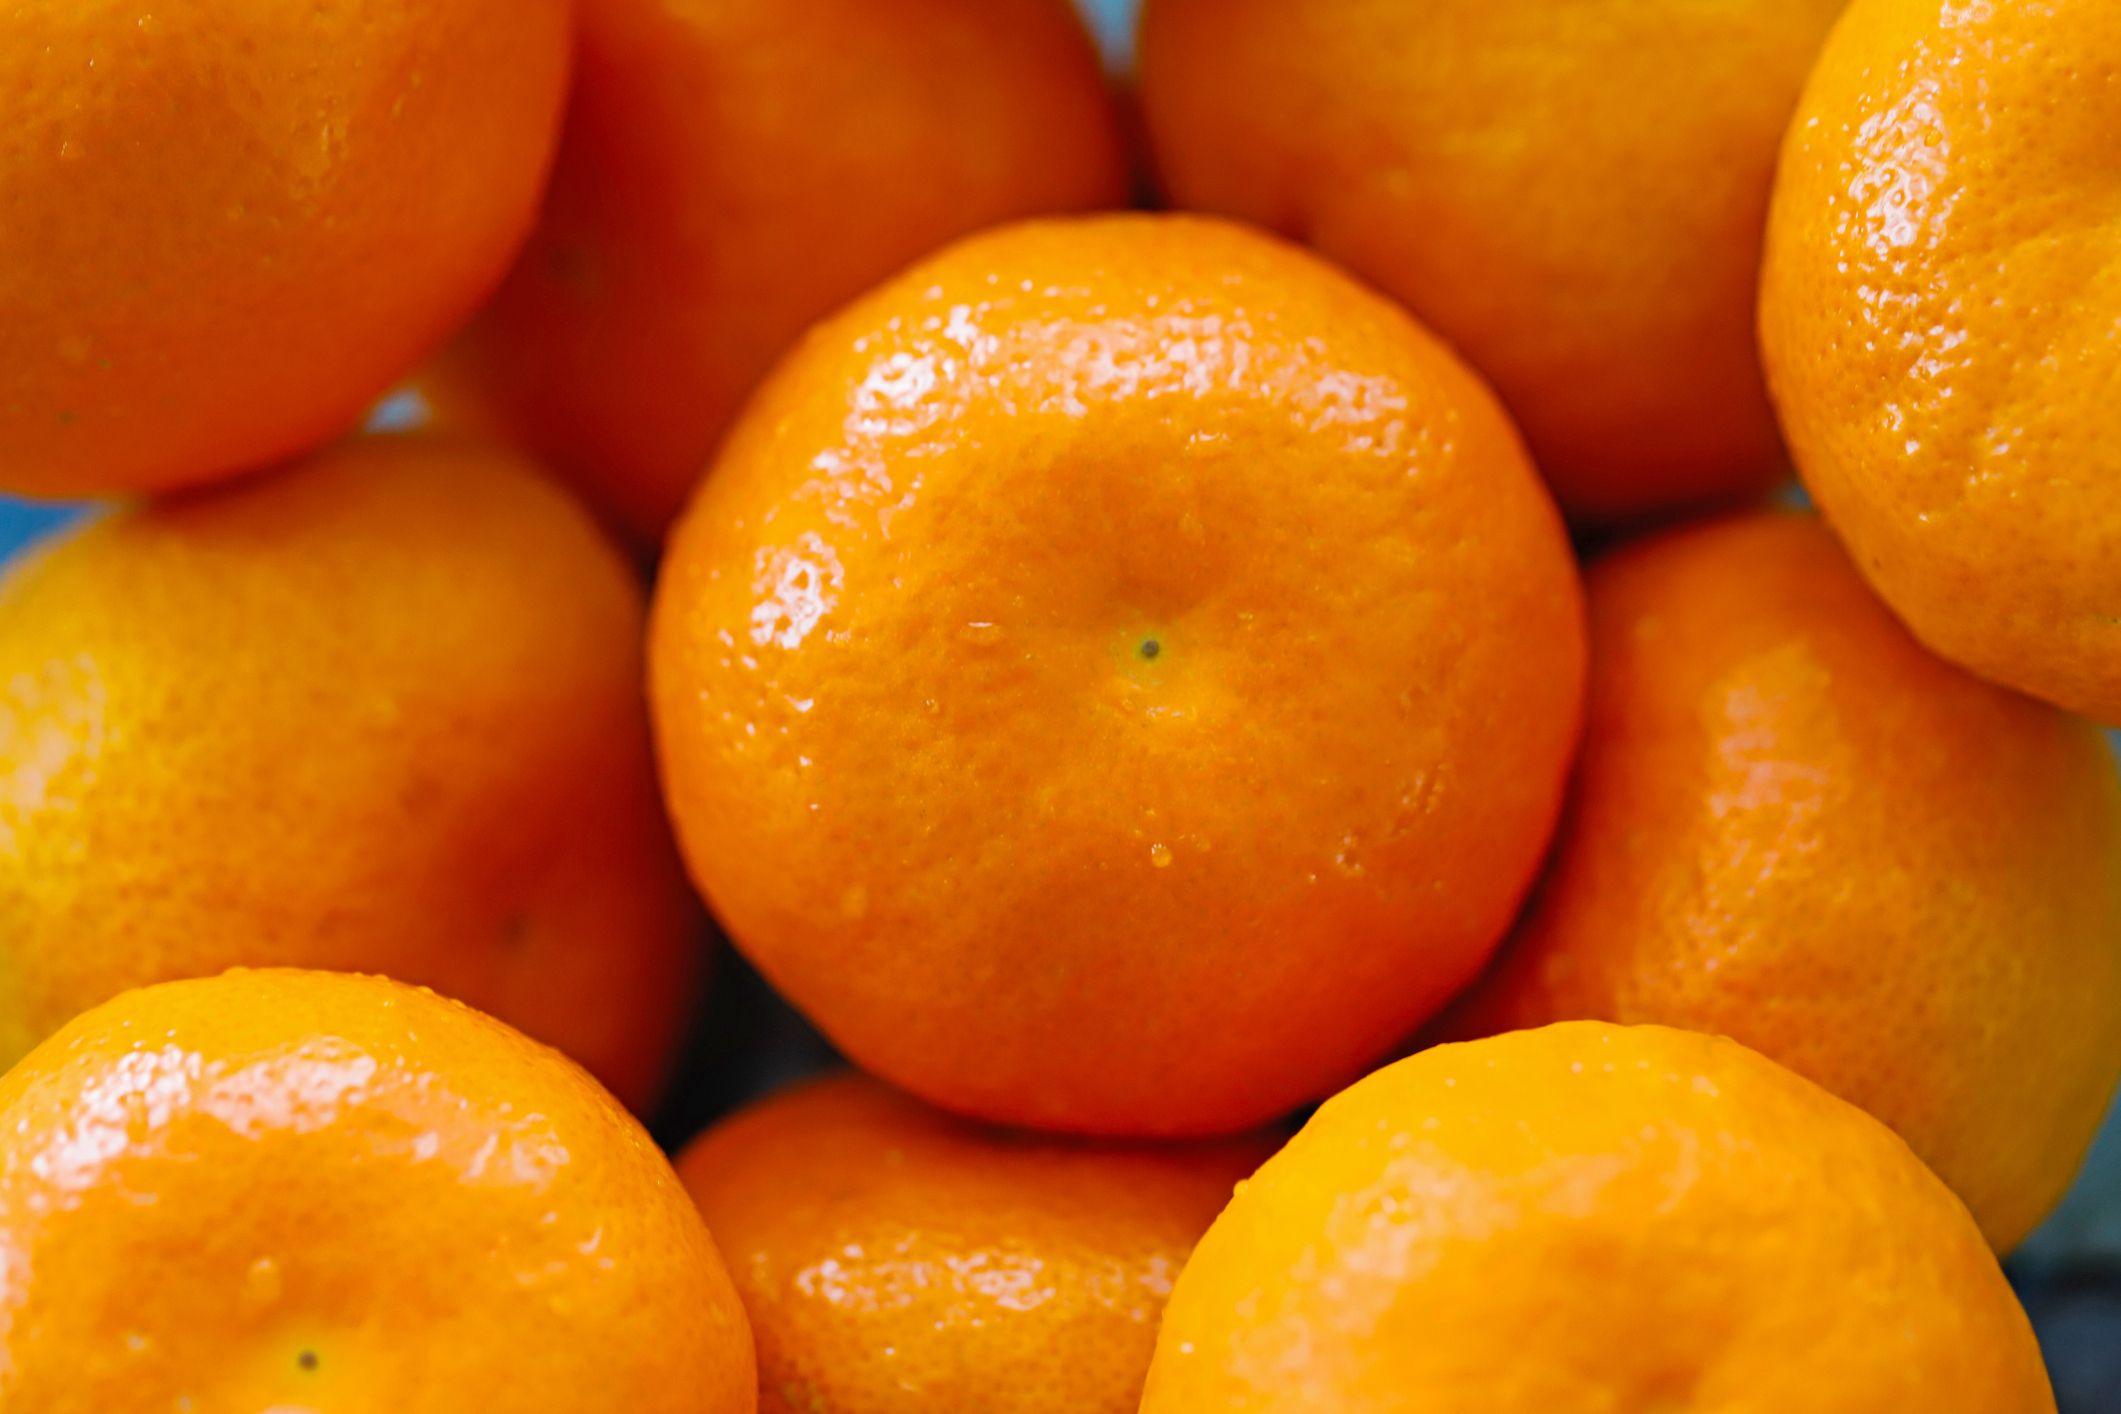 What Are The Benefits Of Tangerines? - Differences Between Oranges